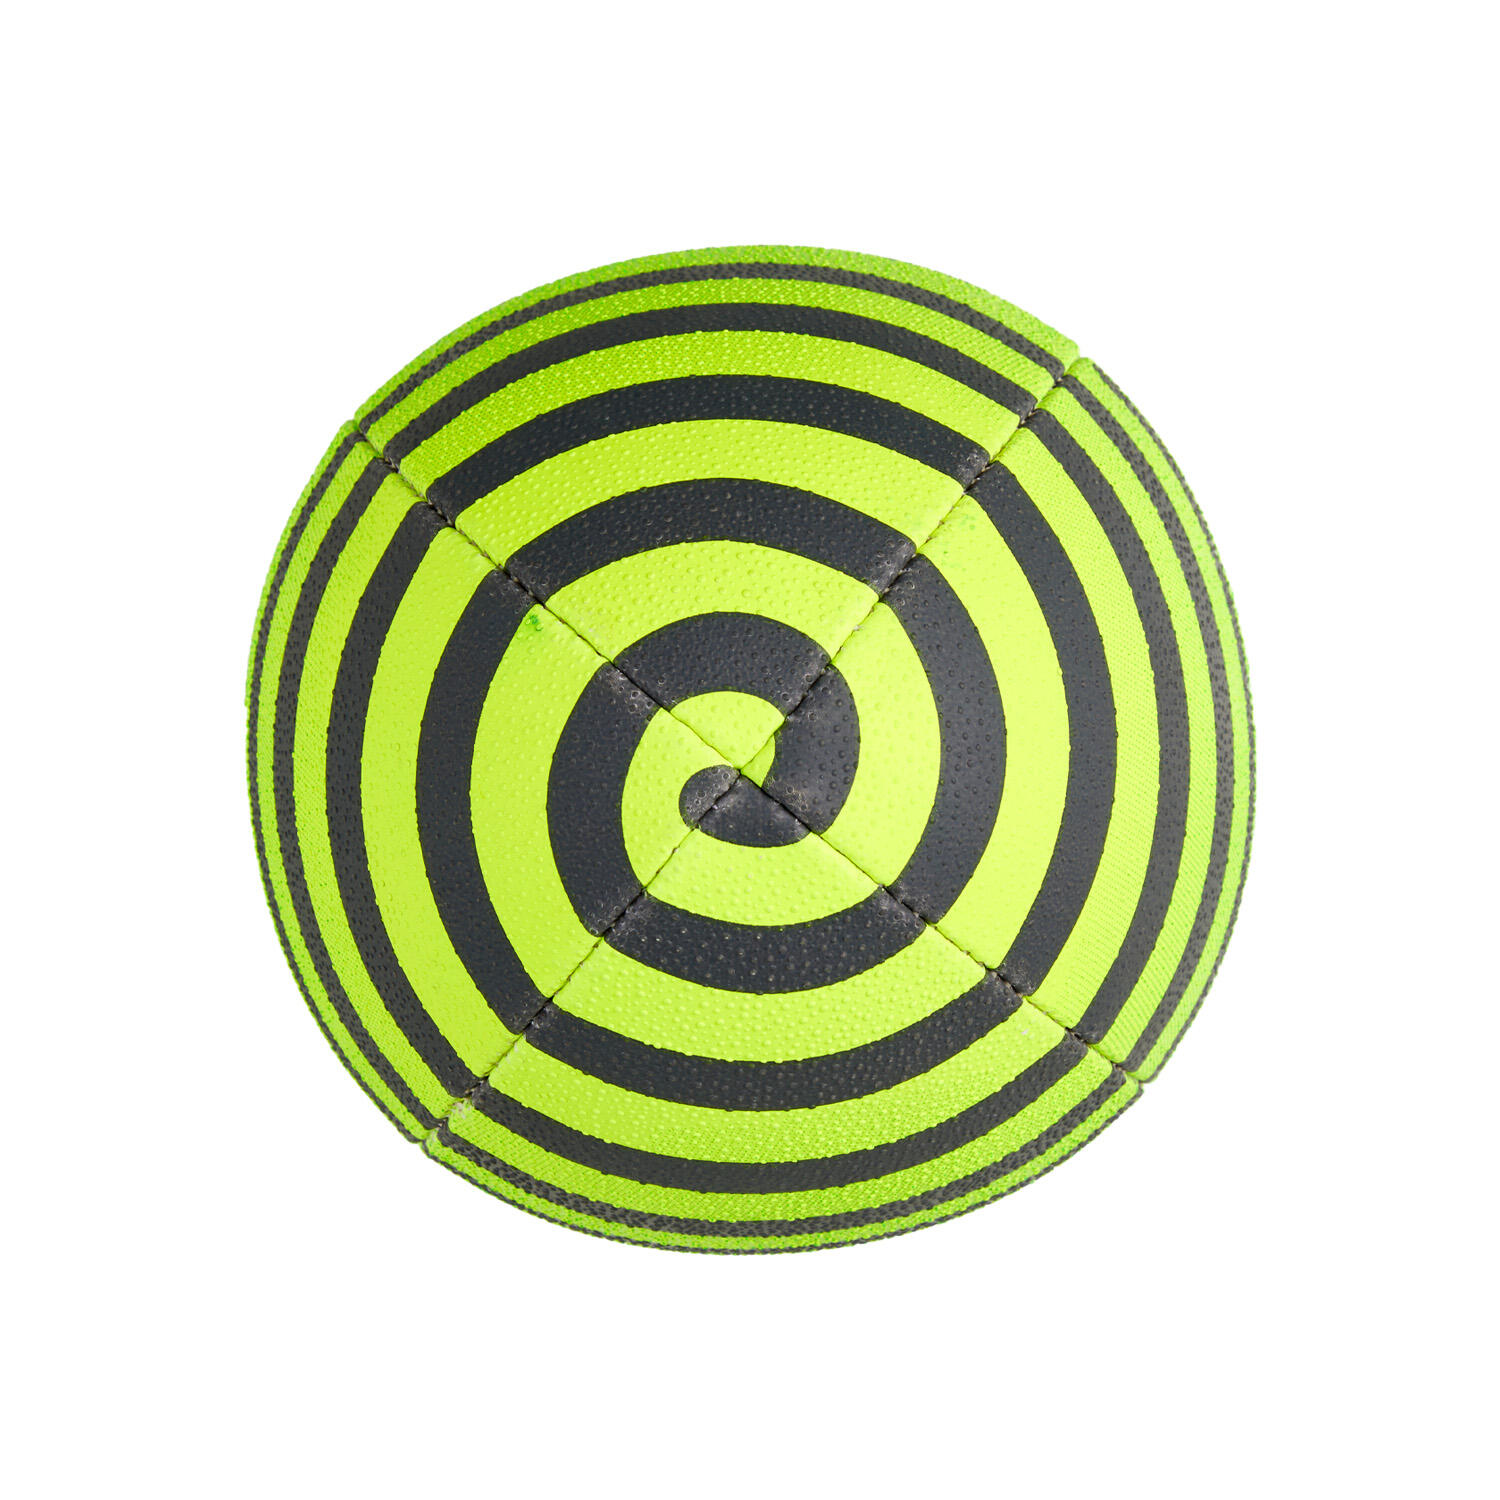 Ram Rugby Ball - Squad - Trainer - (Size Mini) - Spiral 4/6